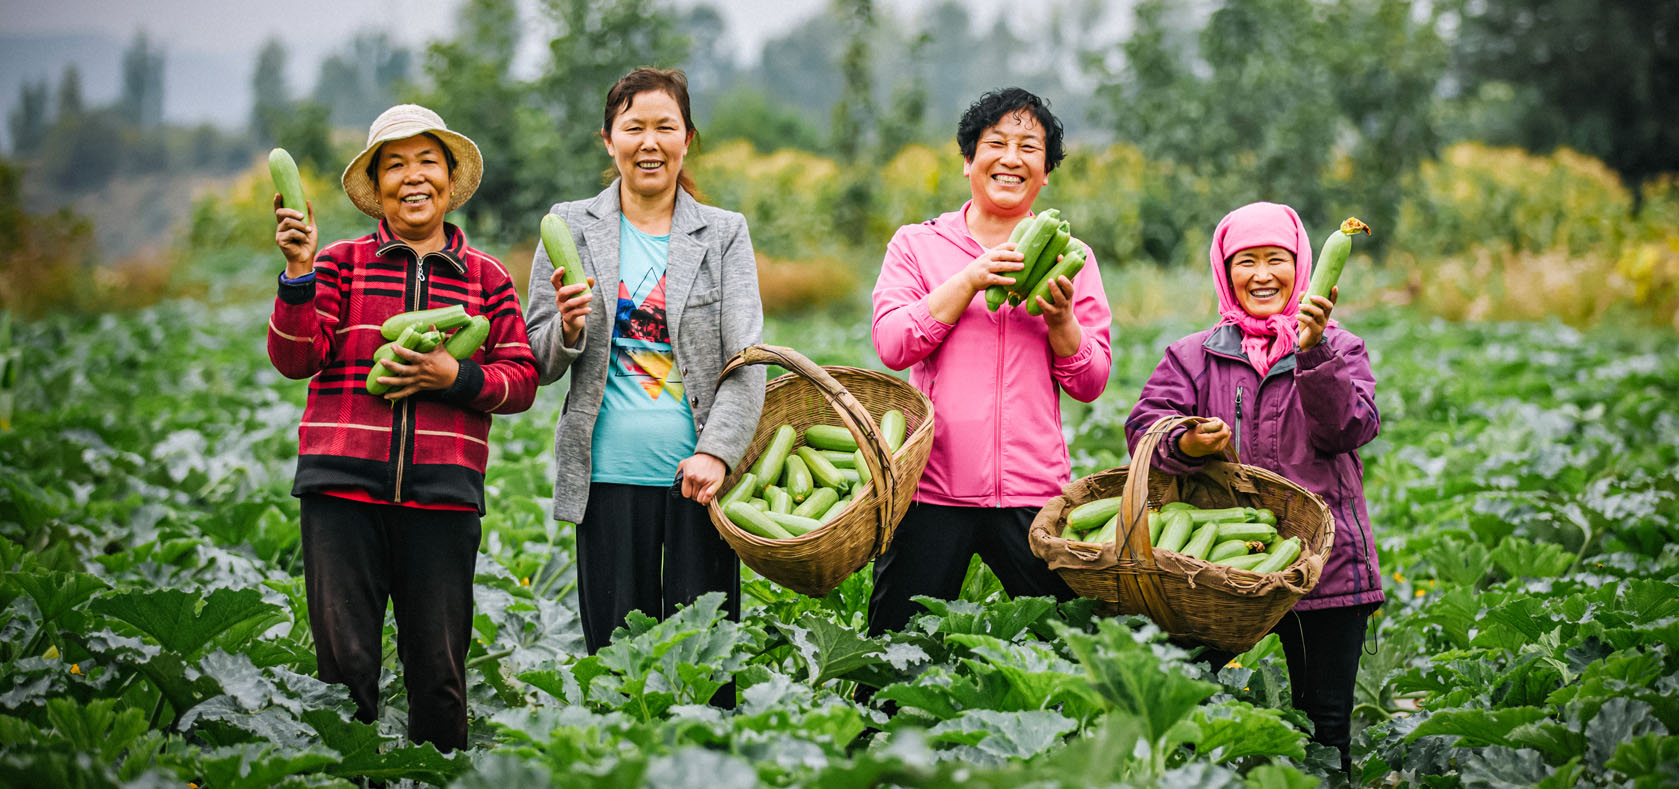 Ms. Li Yulan (second from right) and other cooperative members harvest their agricultural products, 2020. Photo: UN Women/Qiu Bi URL: https://www.flickr.com/photos/unwomenasiapacific/51553744399